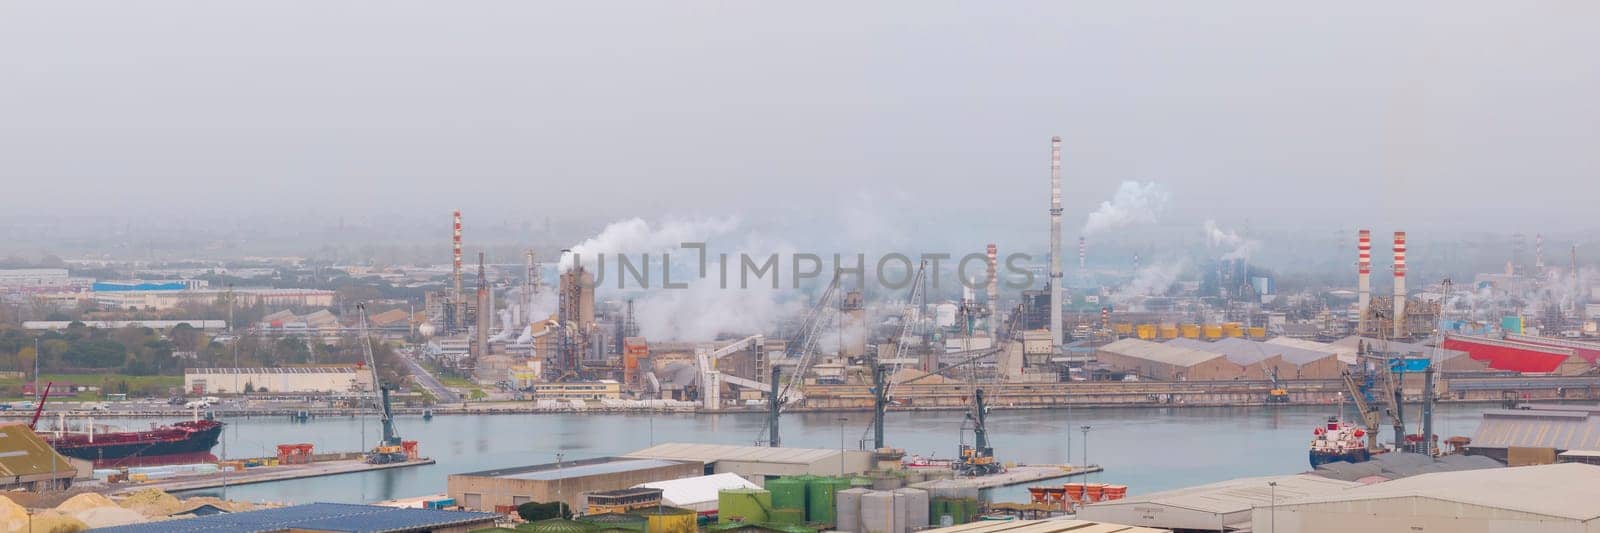 Panorama of hydrocarbon refinery and liquefied natural gas tanks at cloudy day by Robertobinetti70